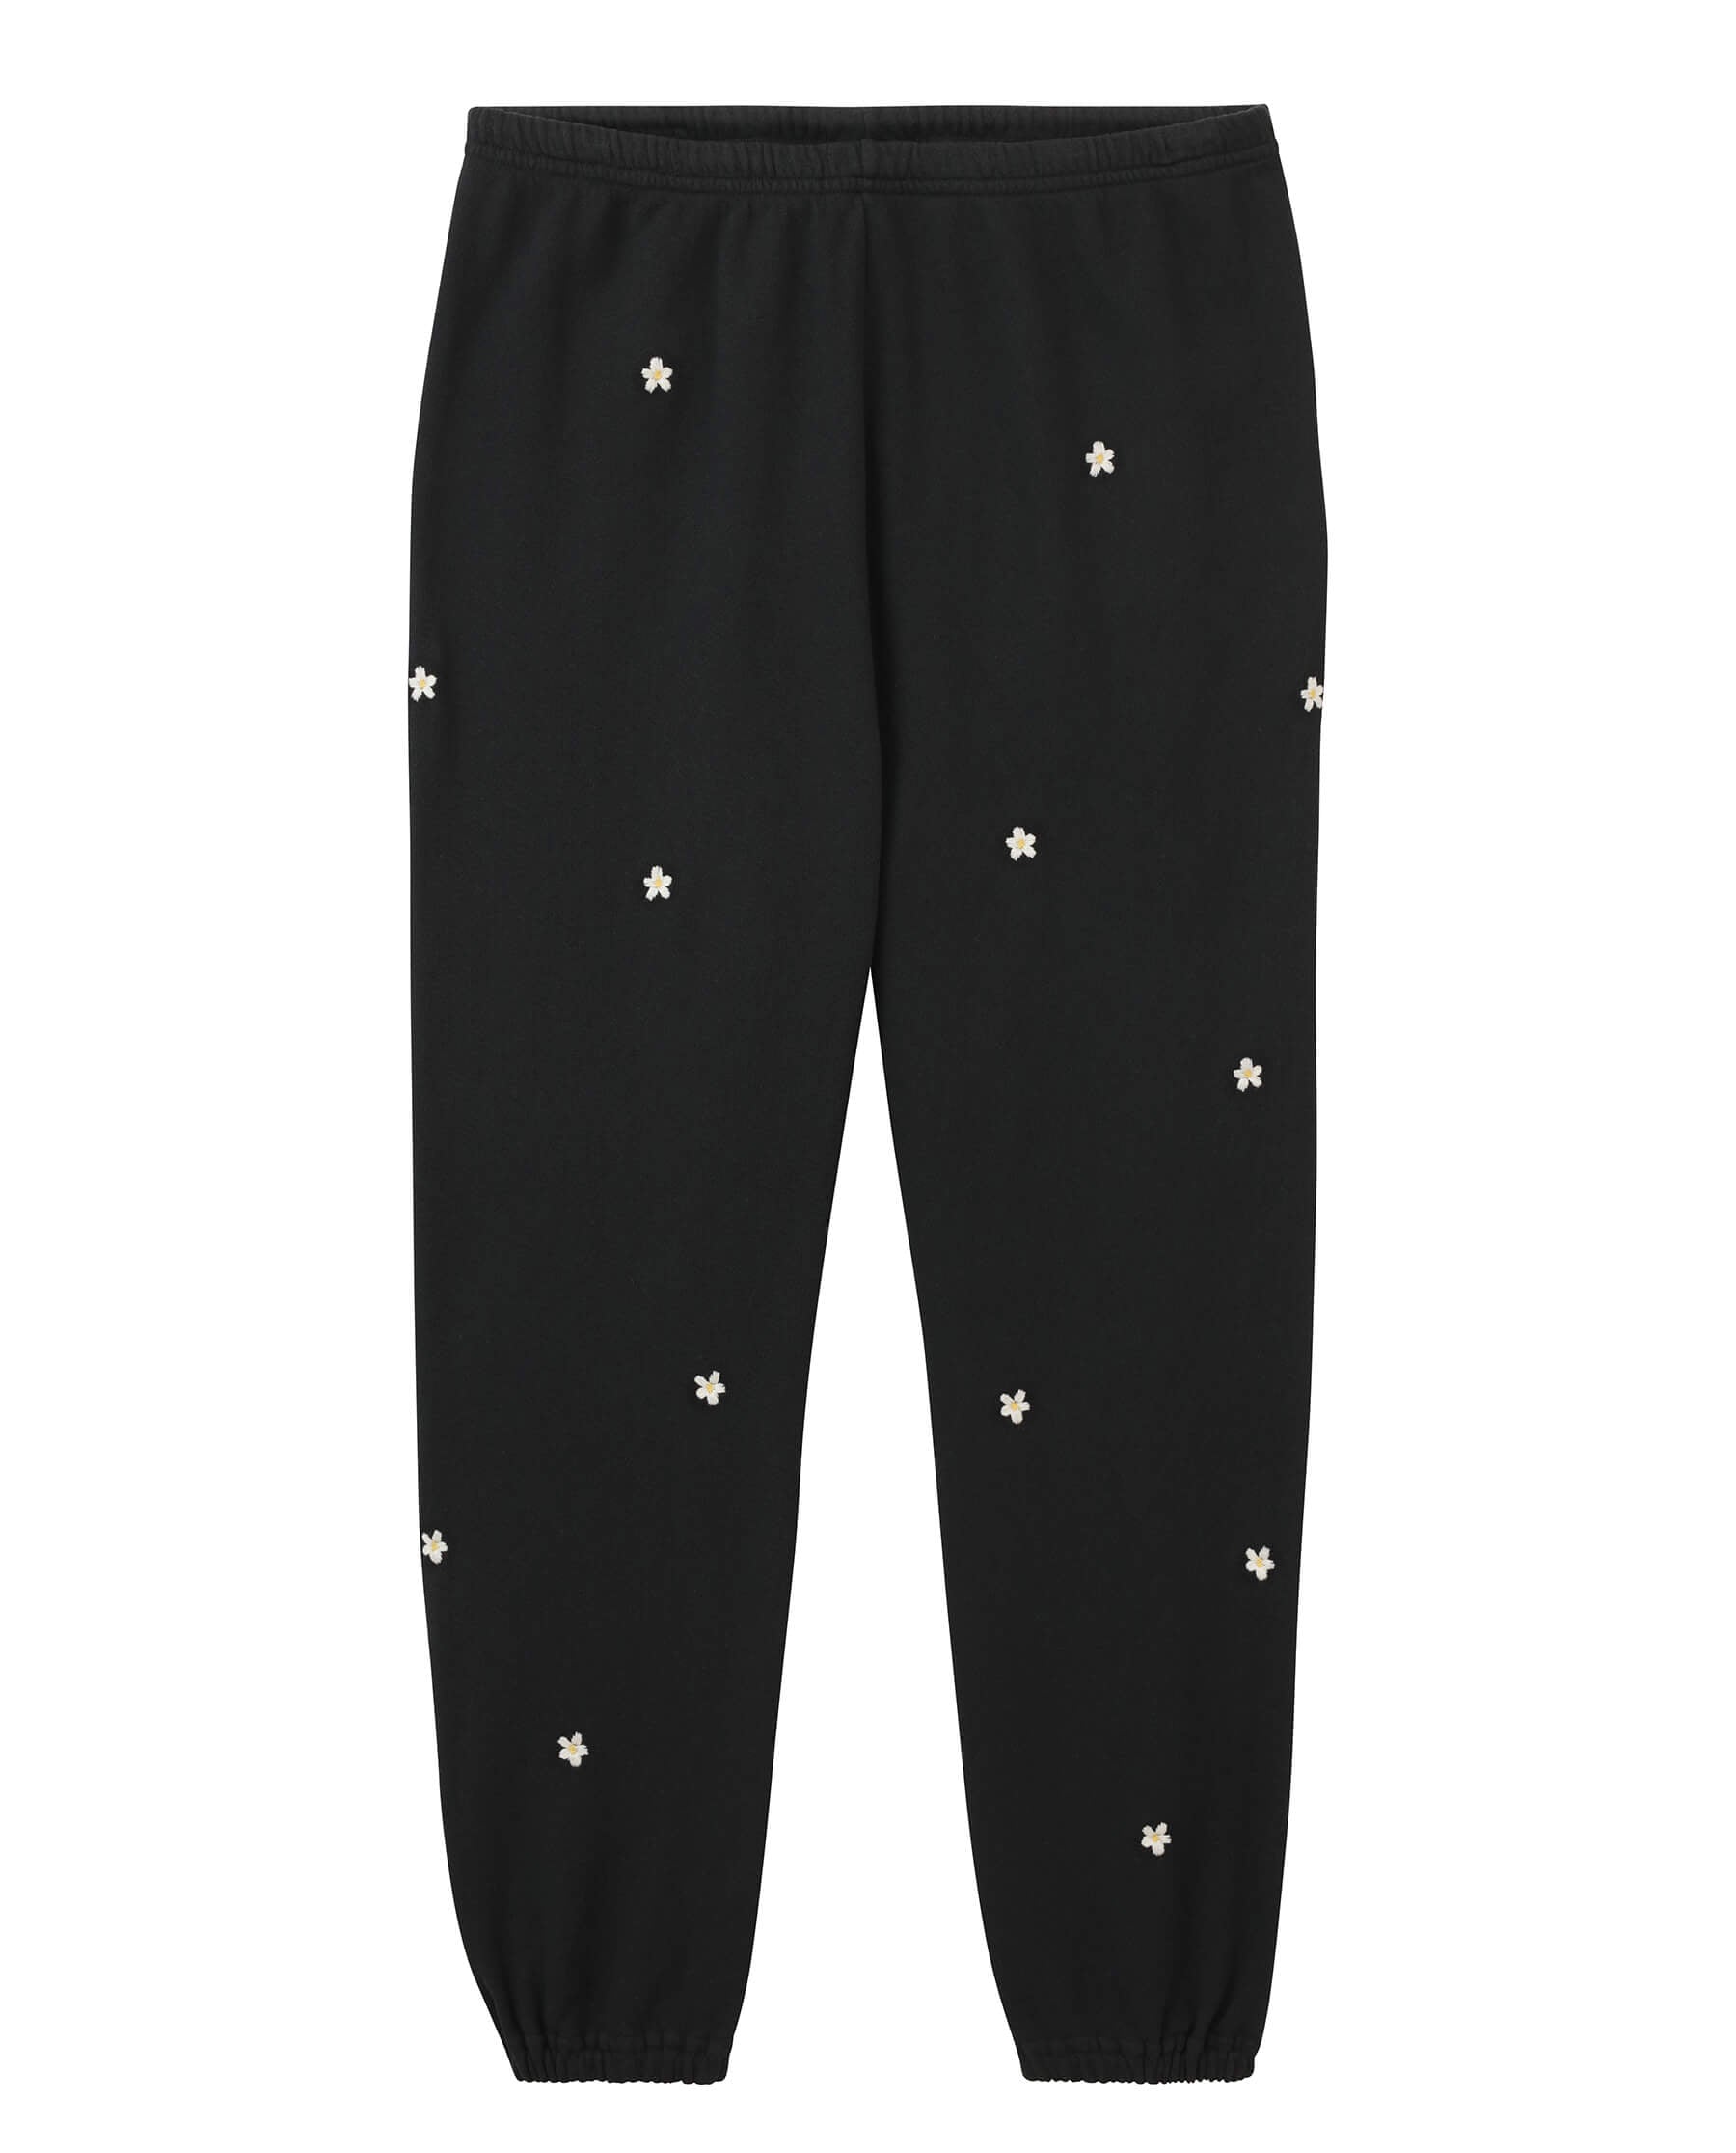 The Stadium Sweatpant. Embroidered -- Almost Black with Cream Flowers